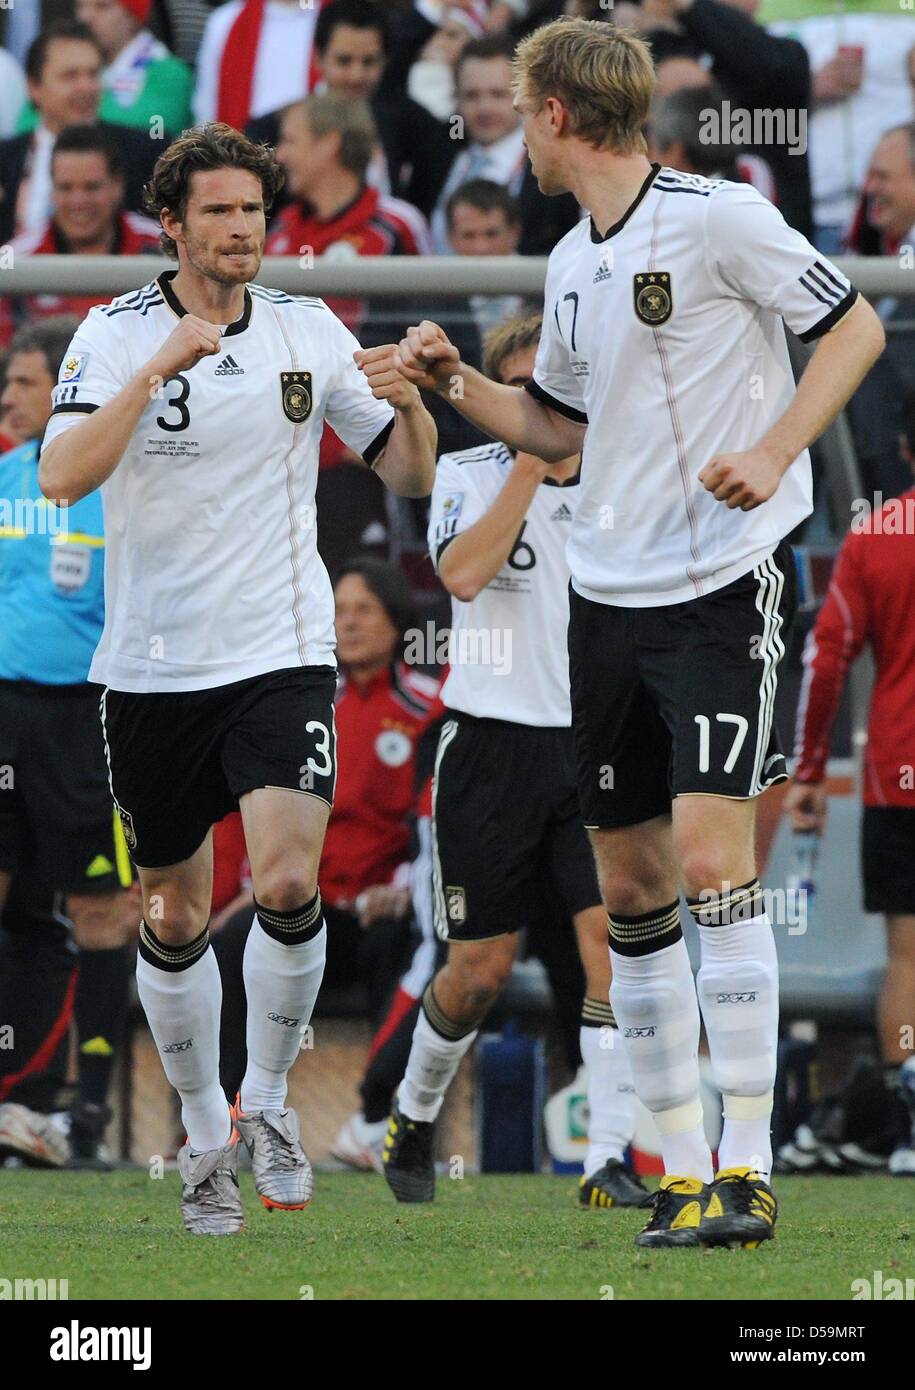 Germany's Arne Friedrich (L) and Per Mertesacker celebrate during the 2010 FIFA World Cup Round of Sixteen match between Germany and England at the Free State Stadium in Bloemfontein, South Africa 27 June 2010. Photo: Marcus Brandt dpa - Please refer to http://dpaq.de/FIFA-WM2010-TC Stock Photo